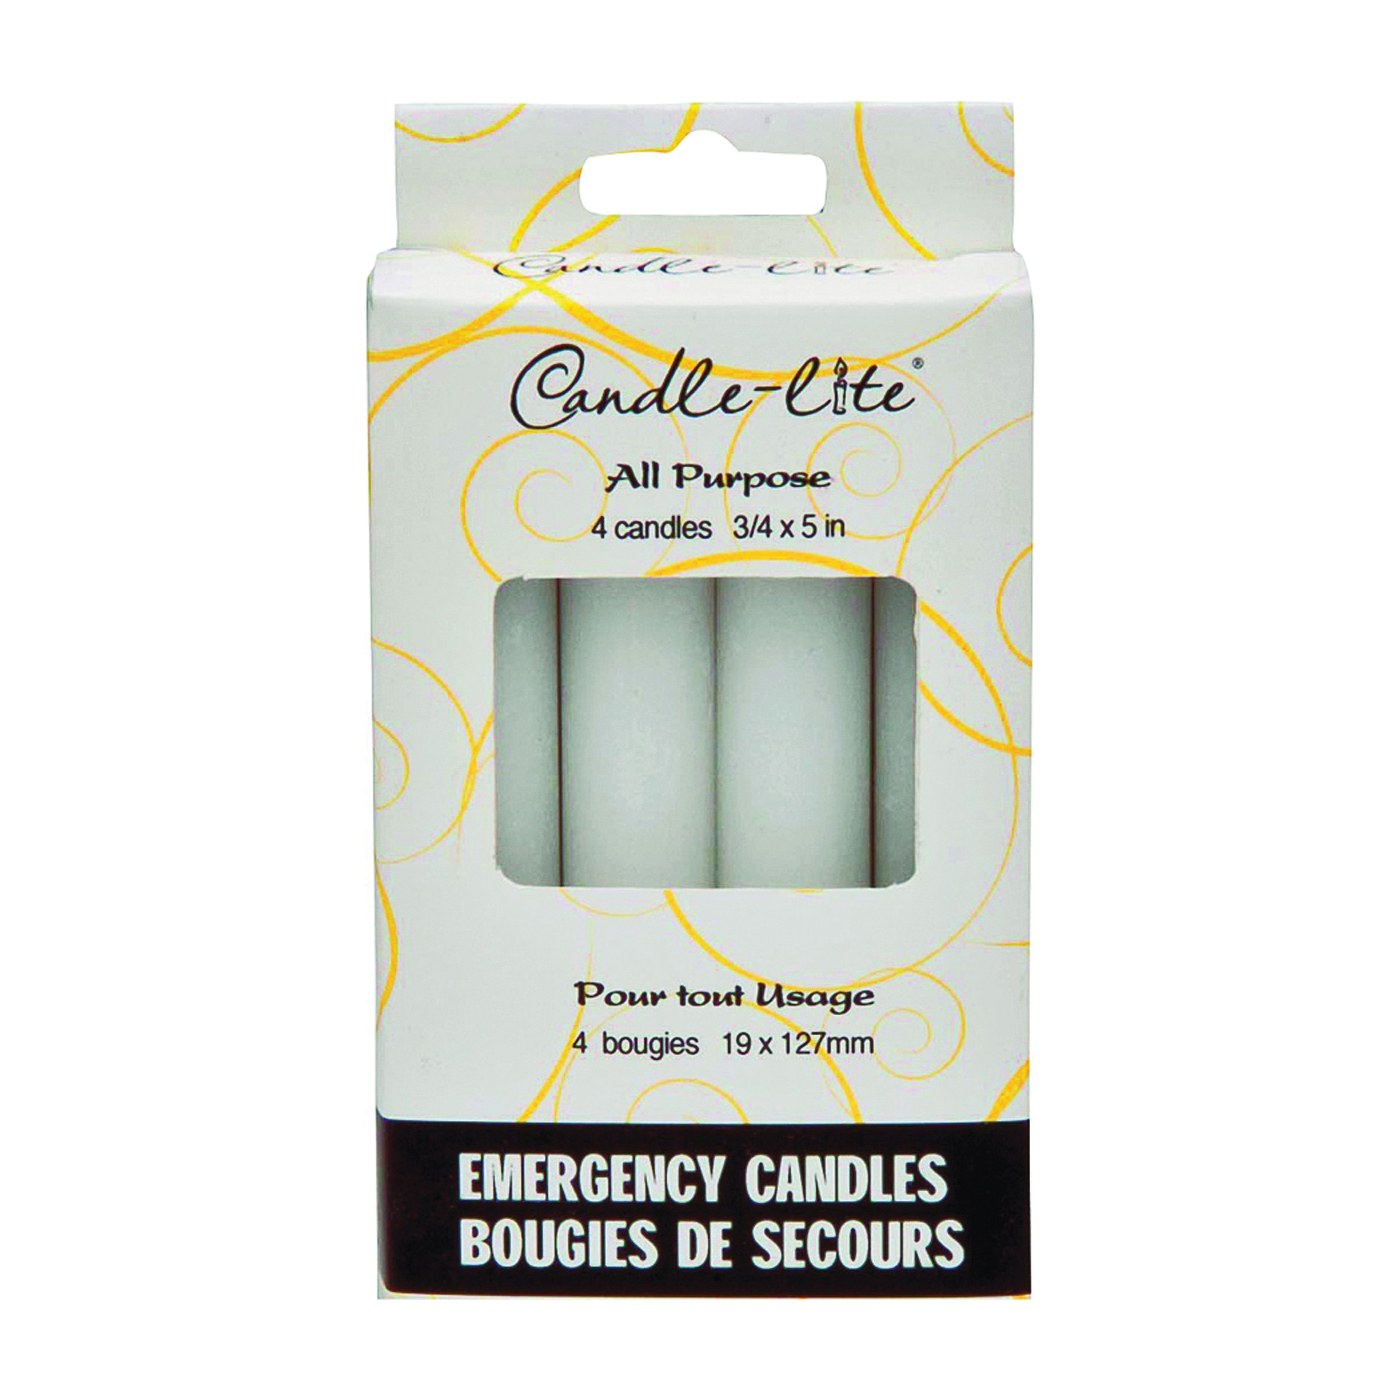 CANDLE-LITE 3745595 Emergency Candle, 25 to 30 hr Burning, White Candle